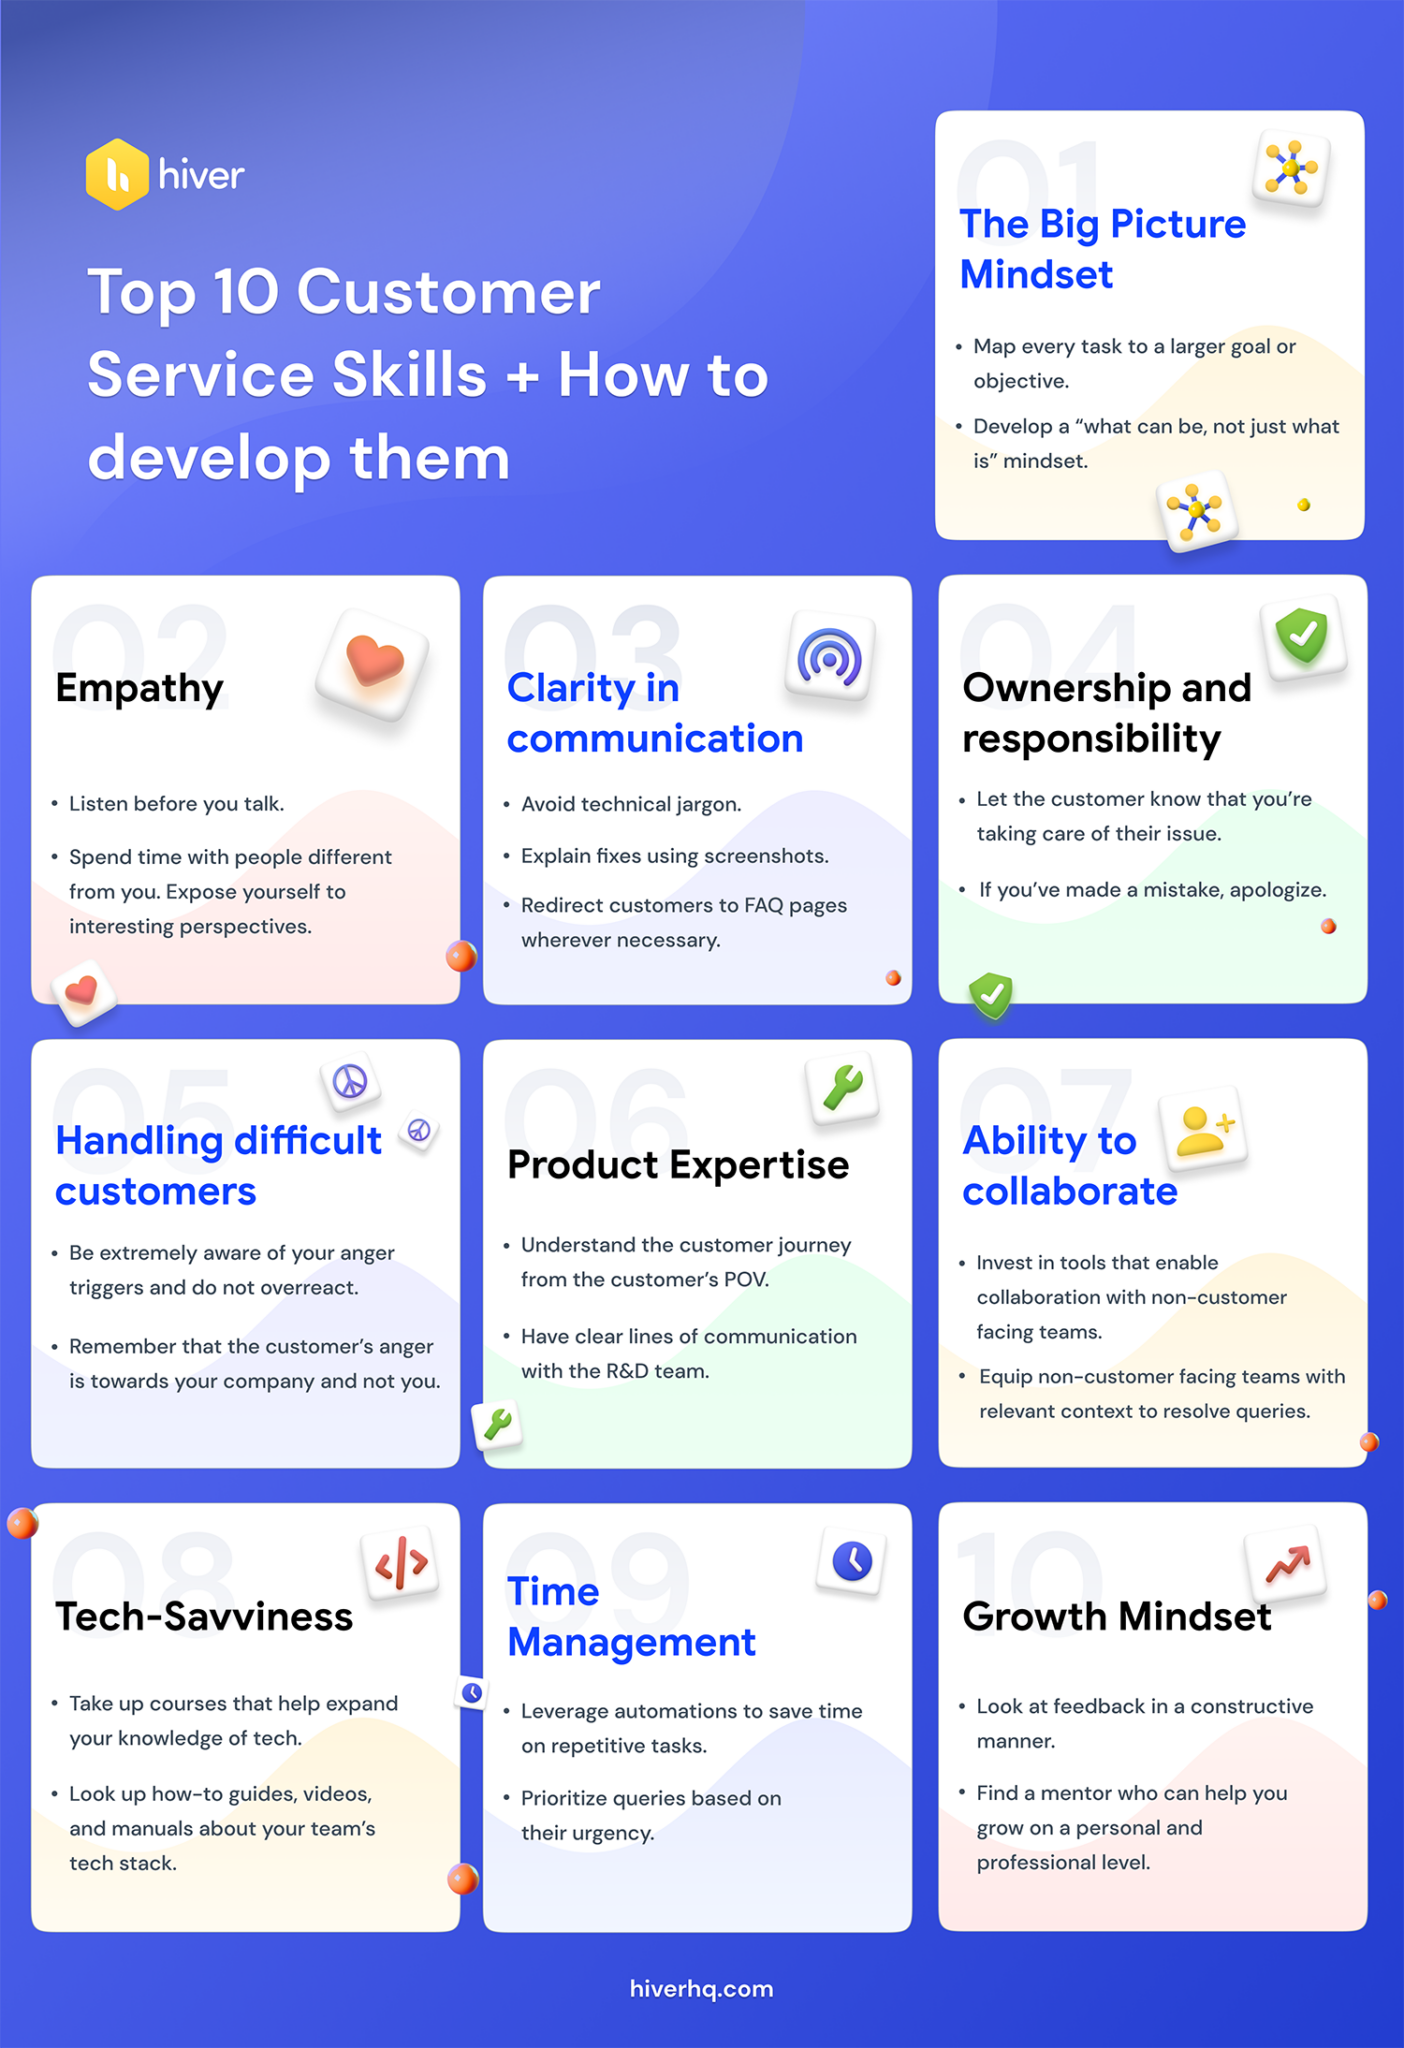 Characteristics of customer service employees who excel - TG